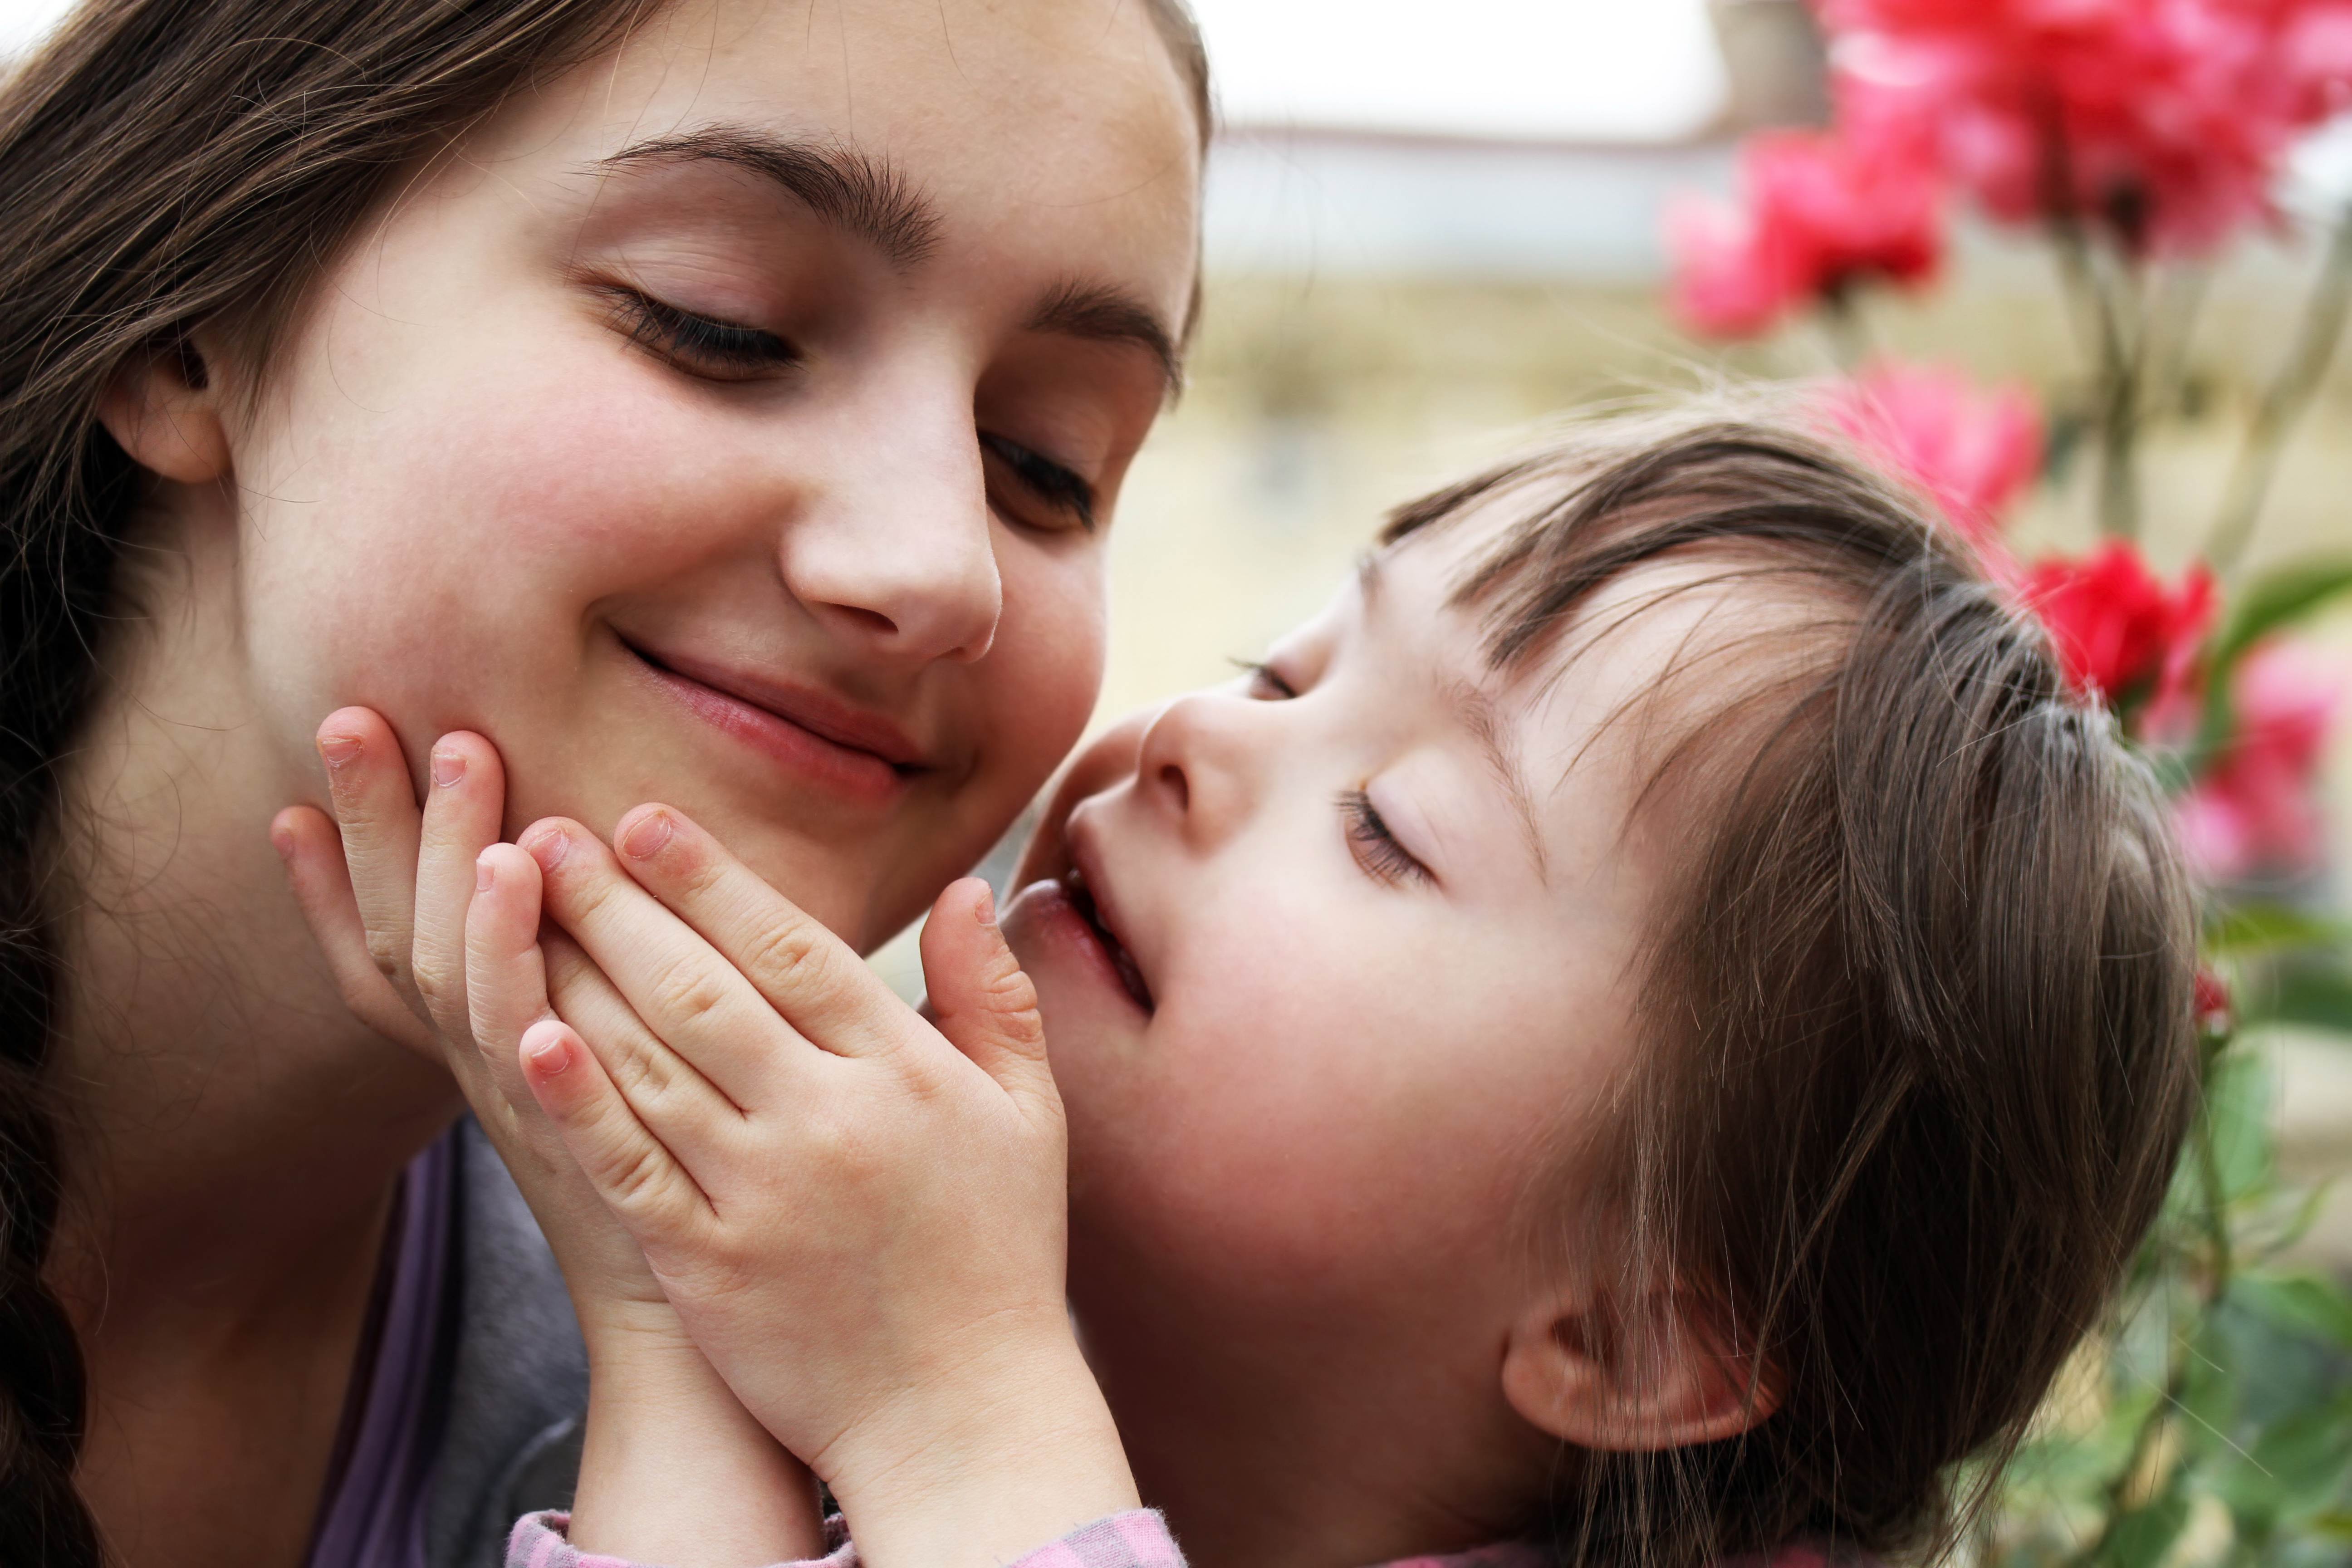 : Image of a smiling young girl with Down syndrome touching the face of another girl